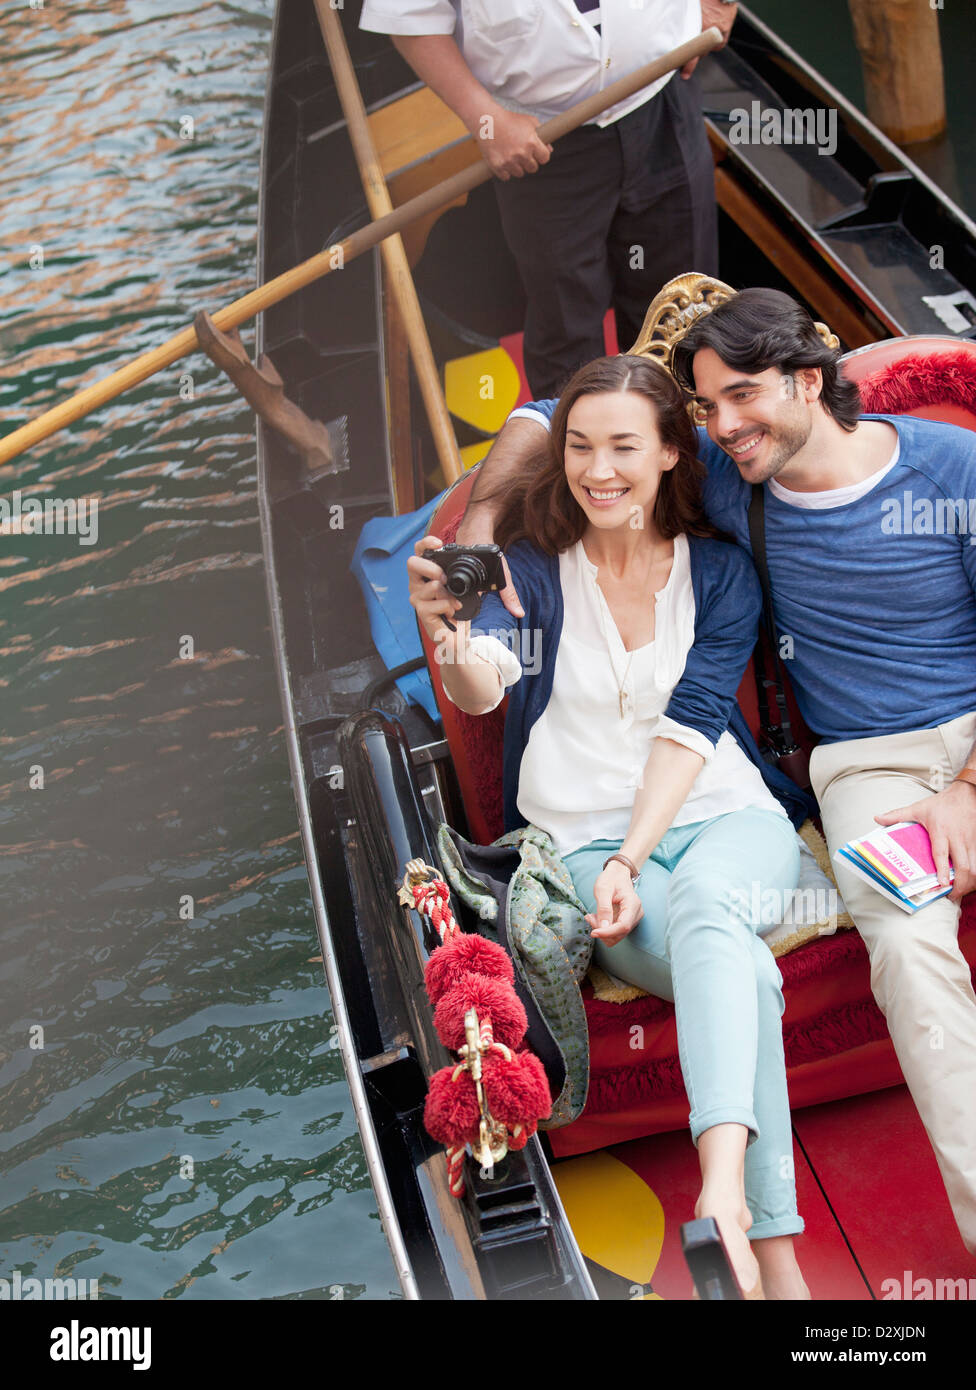 Smiling couple taking photographs in gondola on canal in Venice Stock Photo